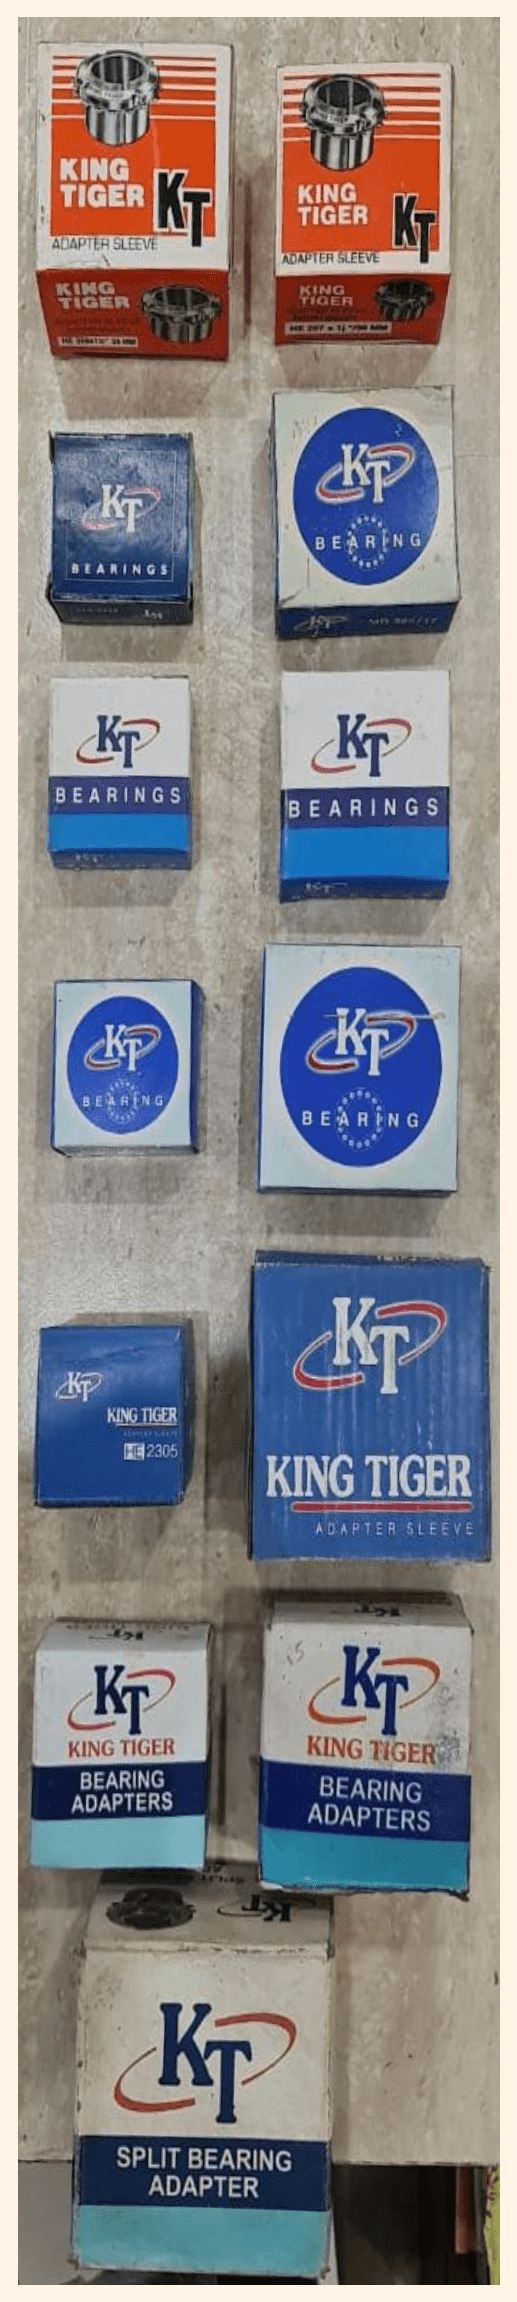 KT King Tiger Products | South India, Middle East, European Countries, USA